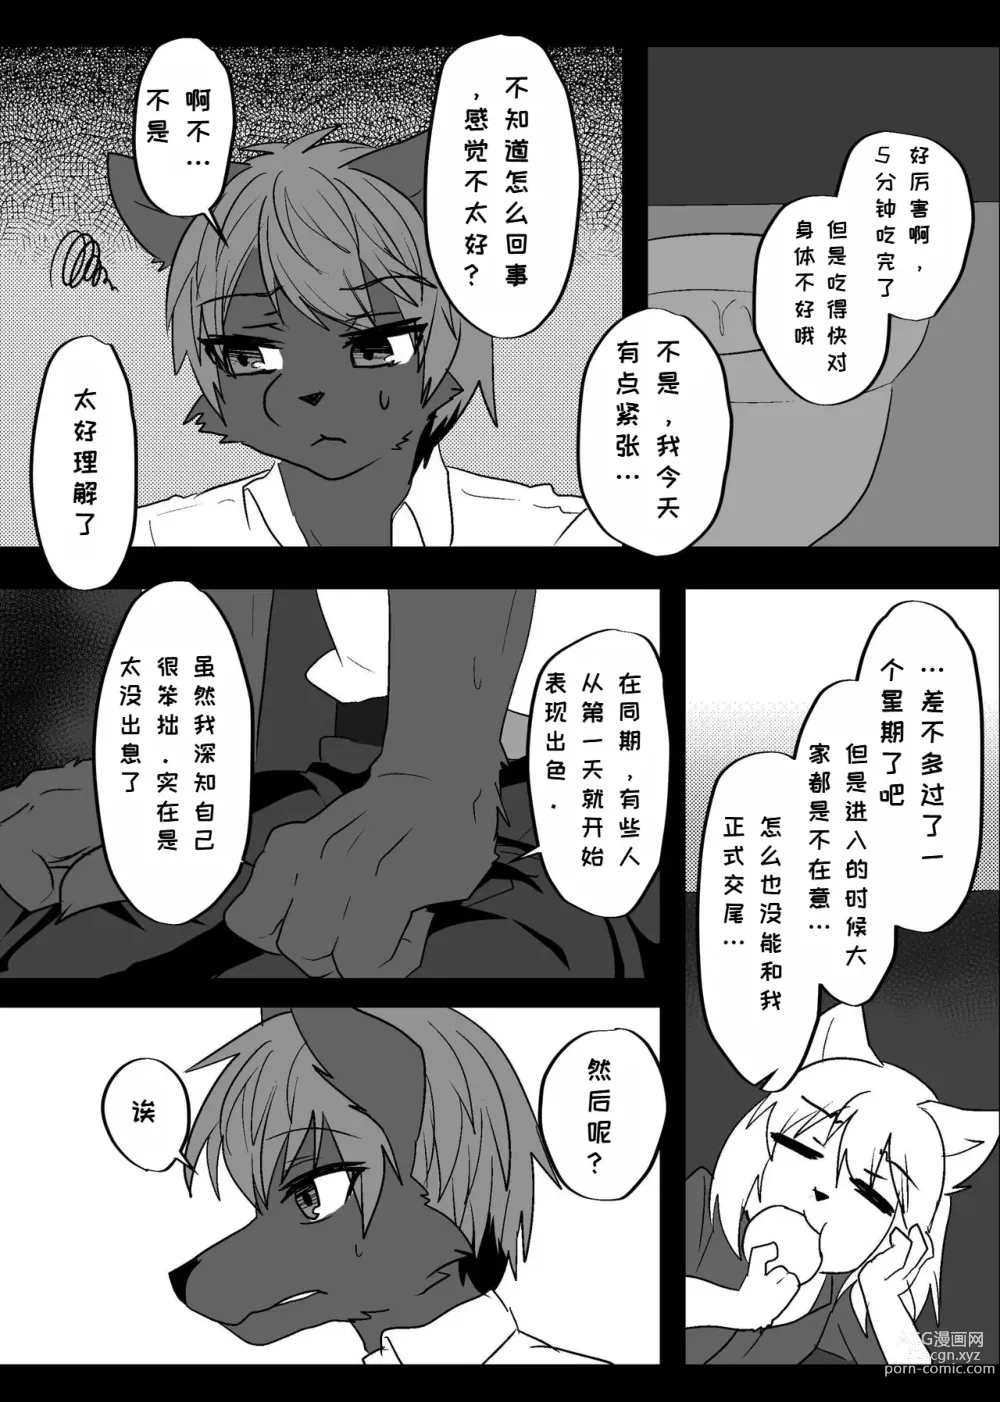 Page 15 of doujinshi 我们发情出勤科 2